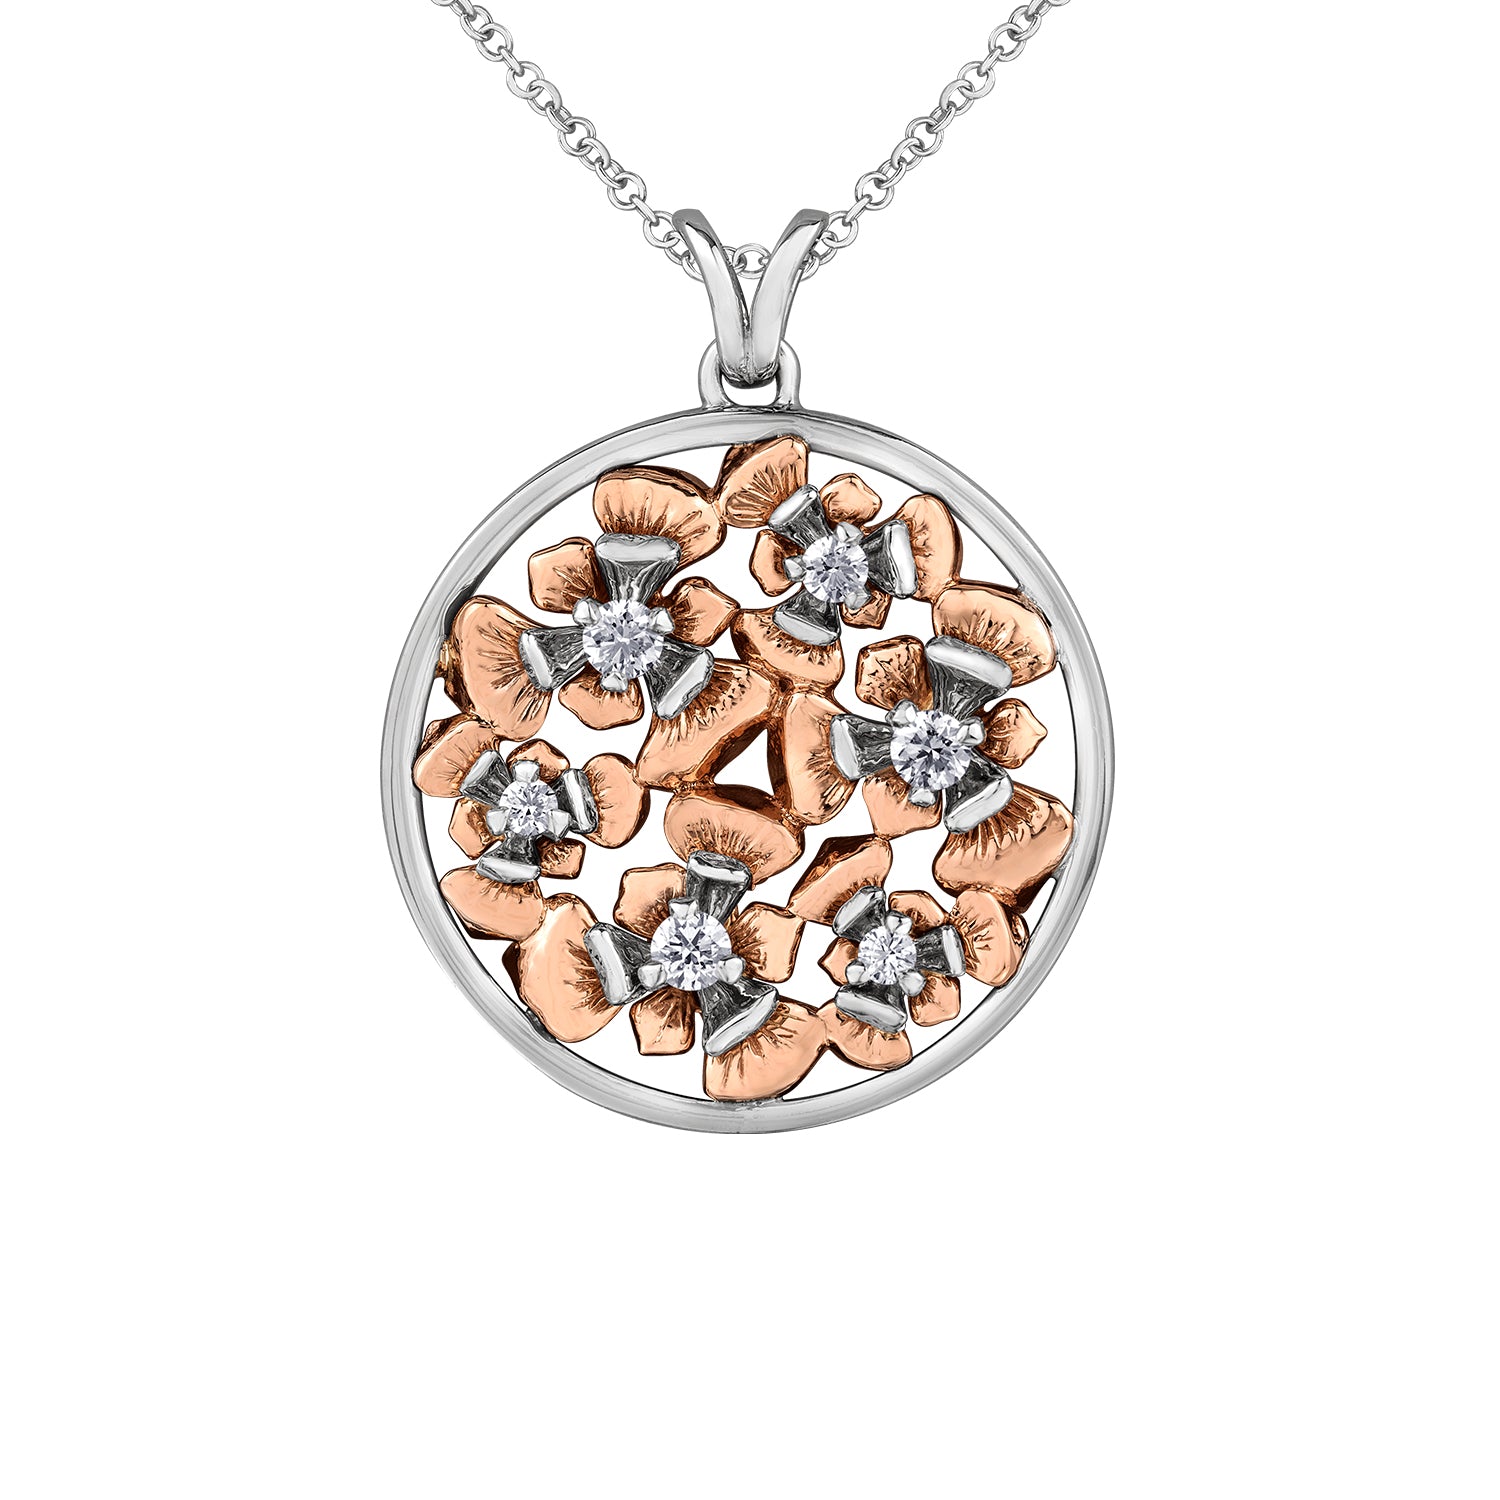 Crafted in 14KT rose and white Certified Canadian Gold, this pendant features Quebec blue flag iris flowers set with round brilliant-cut Canadian diamonds